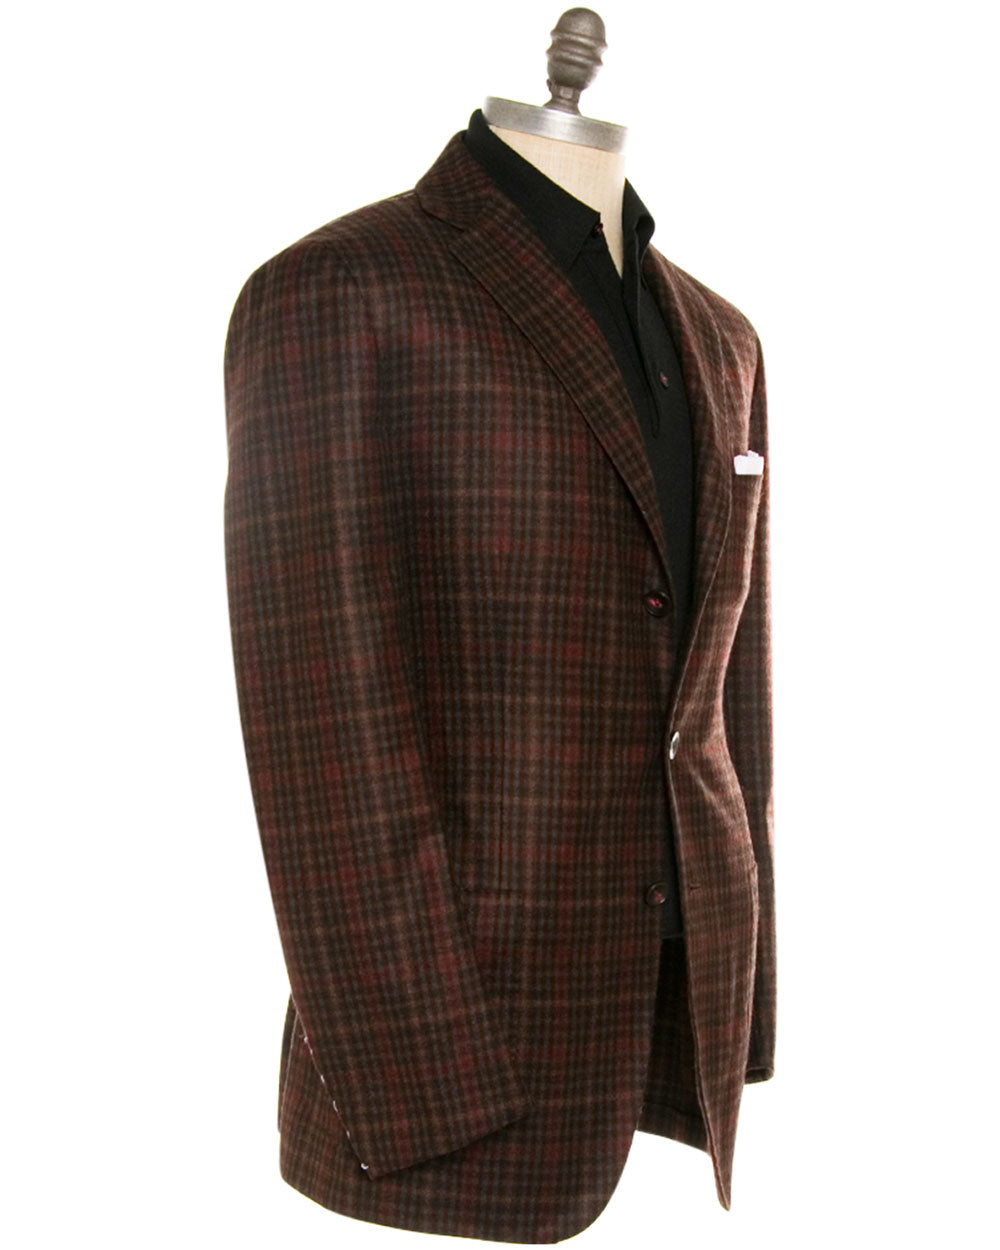 Rust and Chocolate Plaid Sportcoat